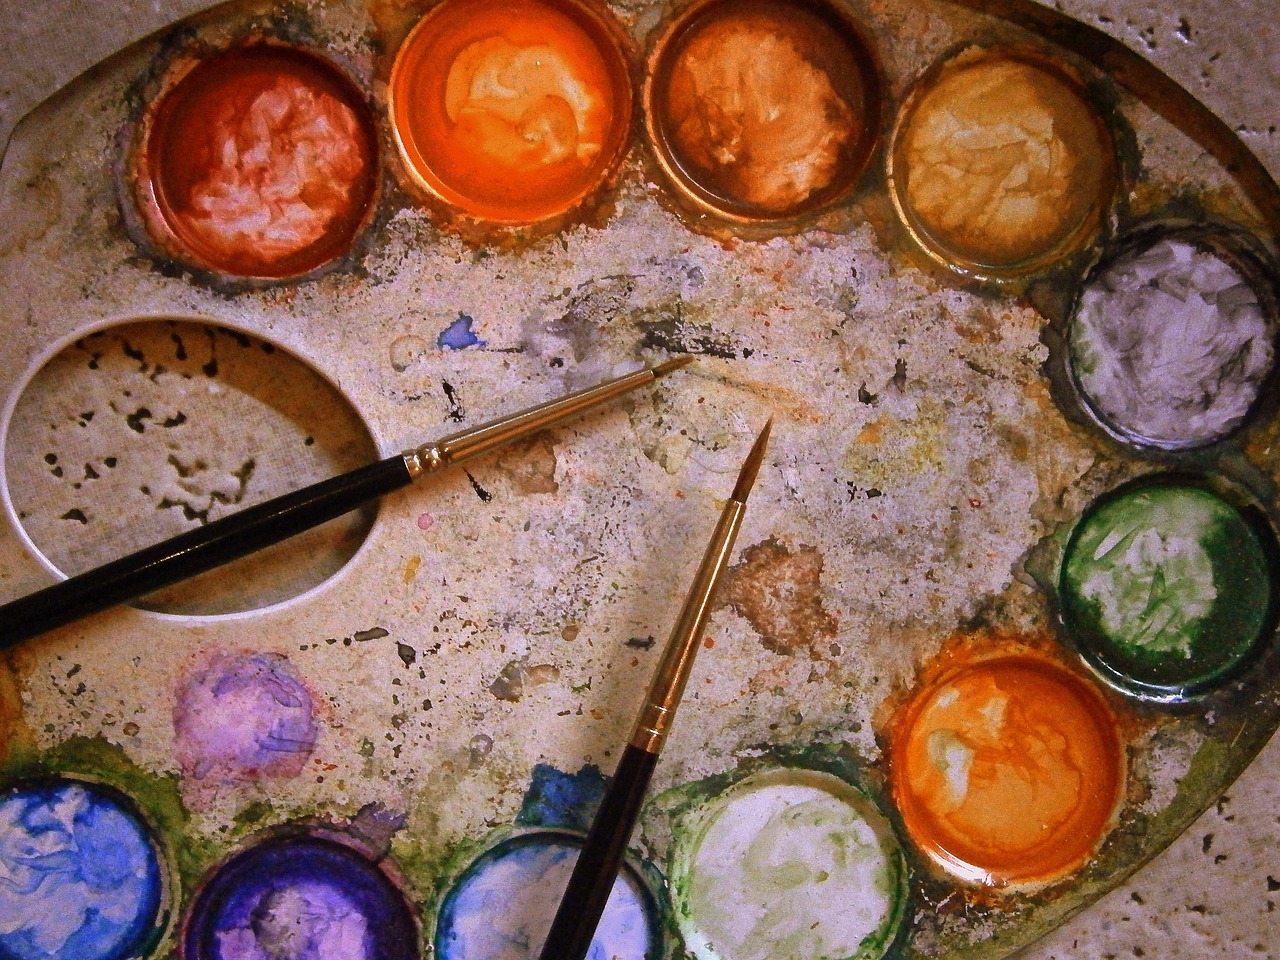 a close up of a paint palette with a paint brush, a watercolor painting, by Marie Bashkirtseff, flickr, circles, old paints, orange palette, elaborate composition